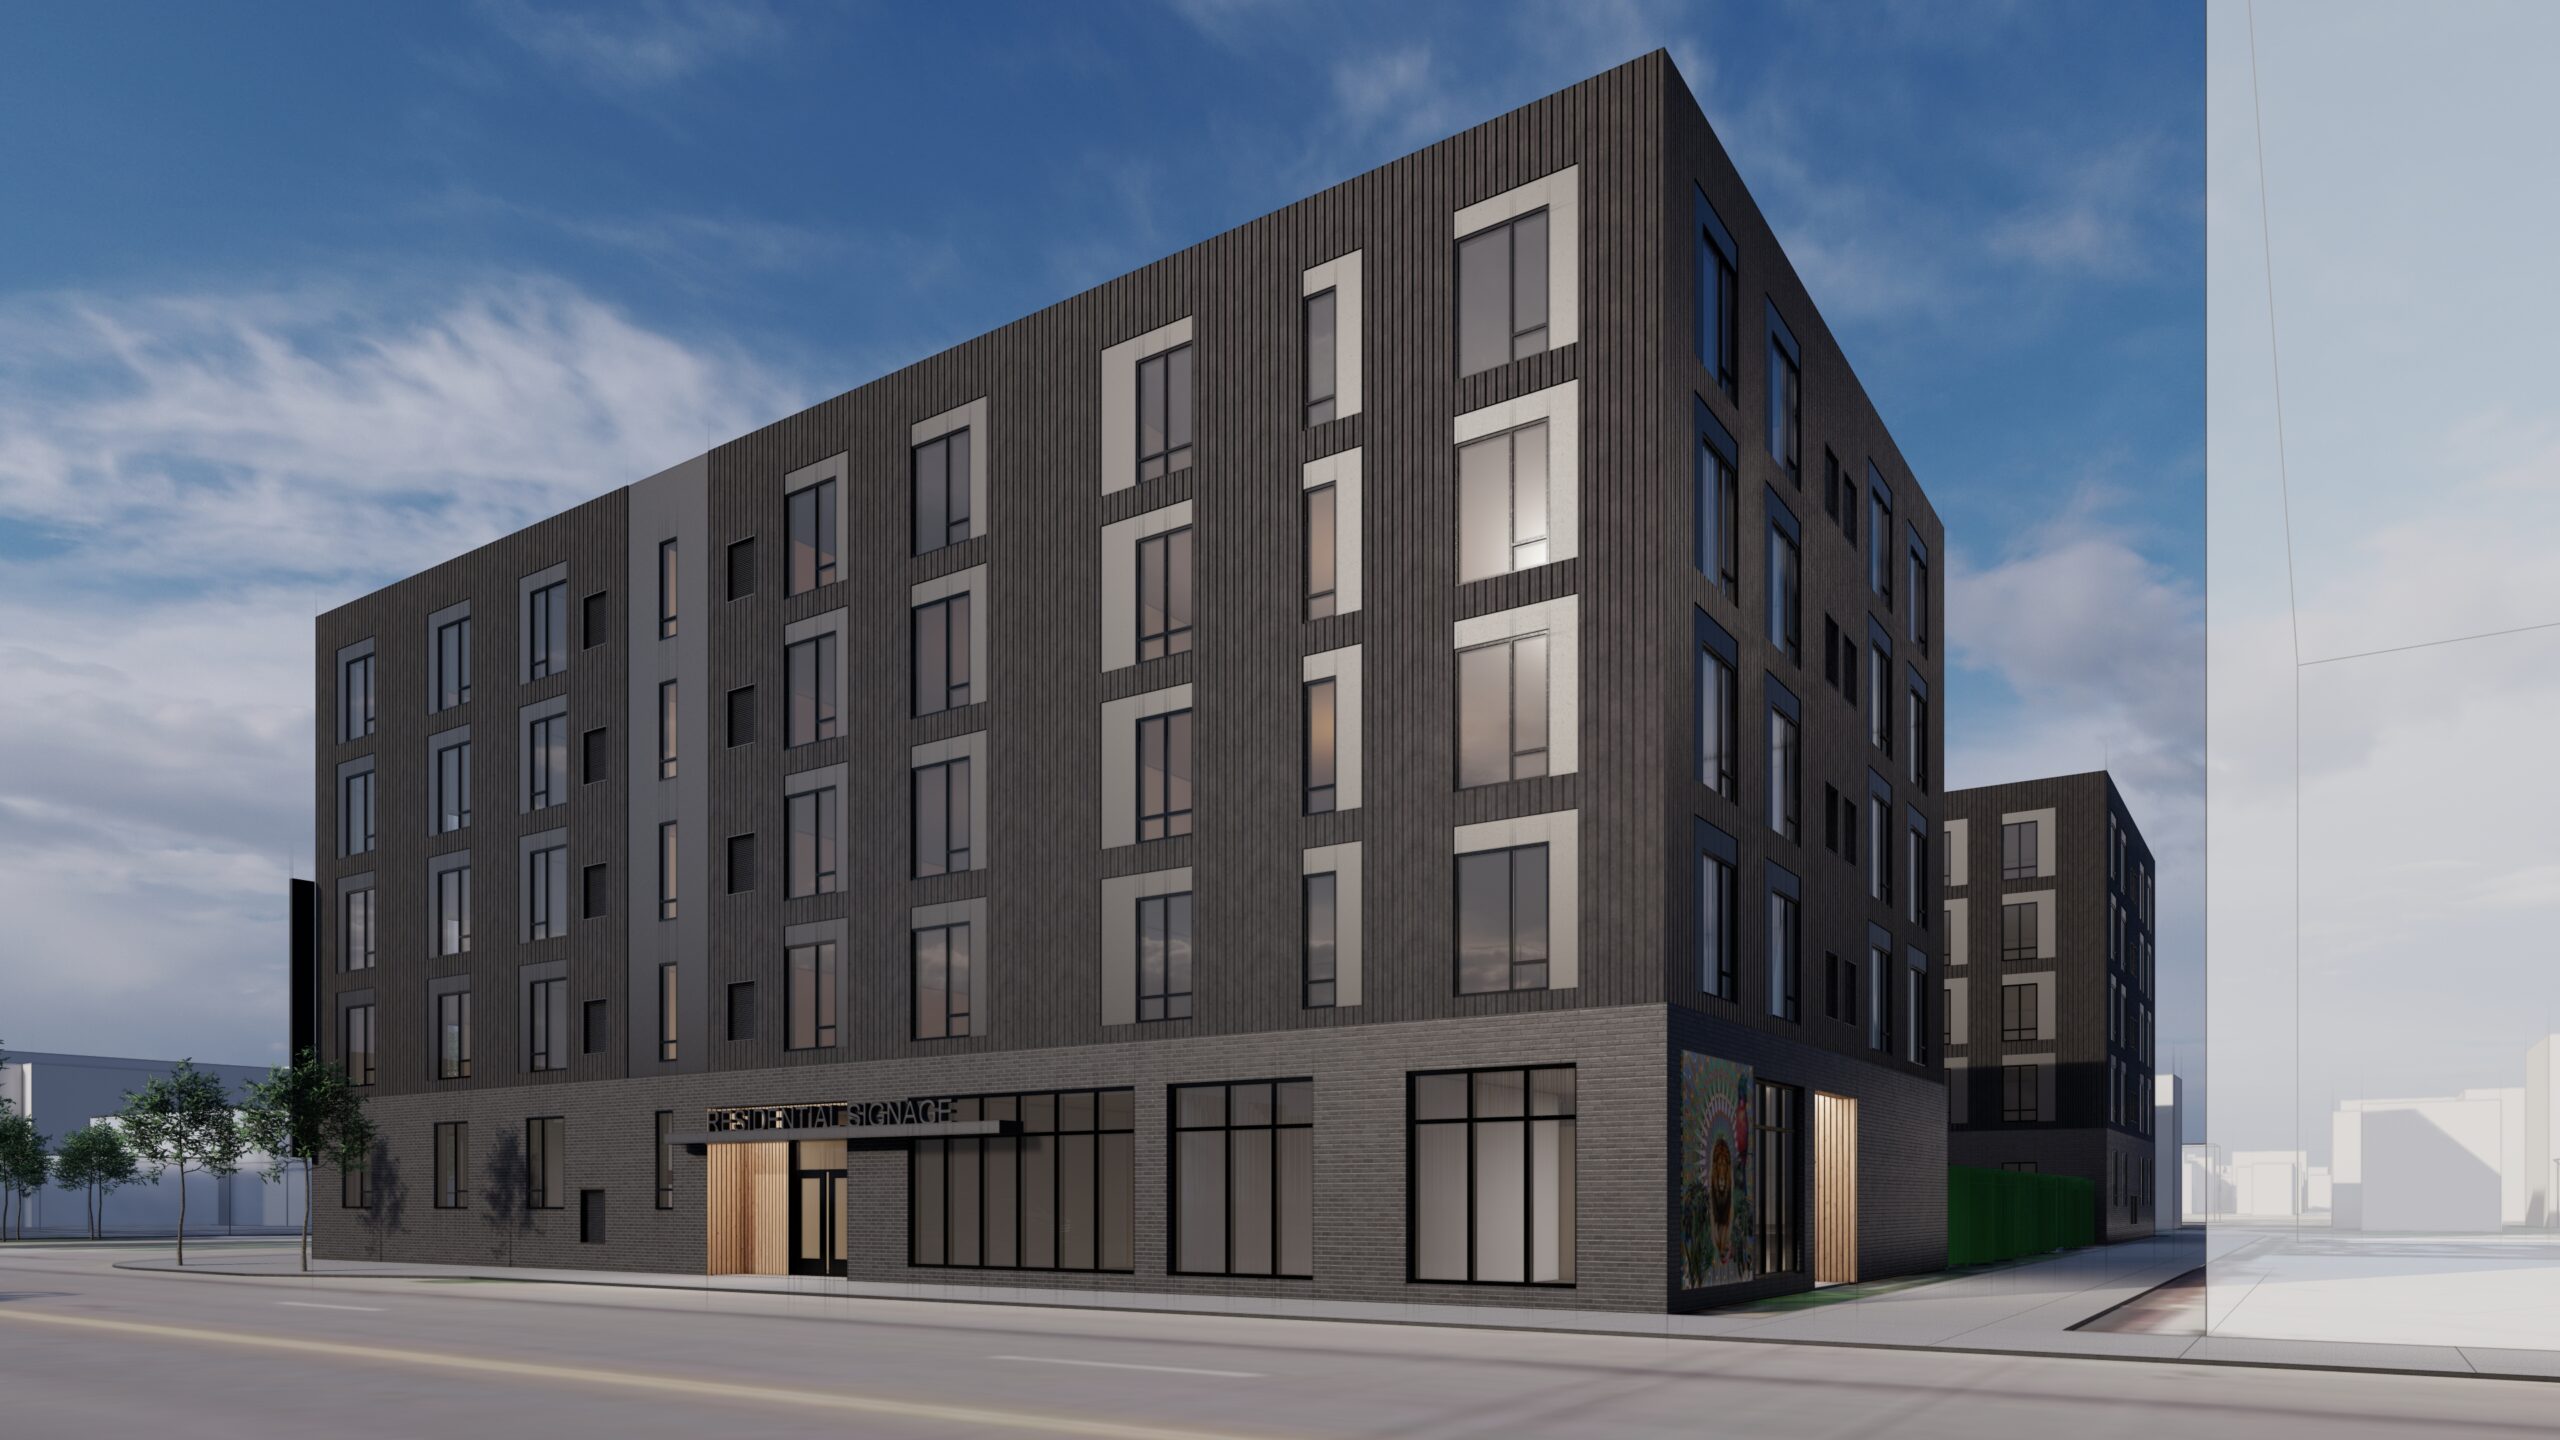 Lupe’s phase three of Lake Street housing moves forward